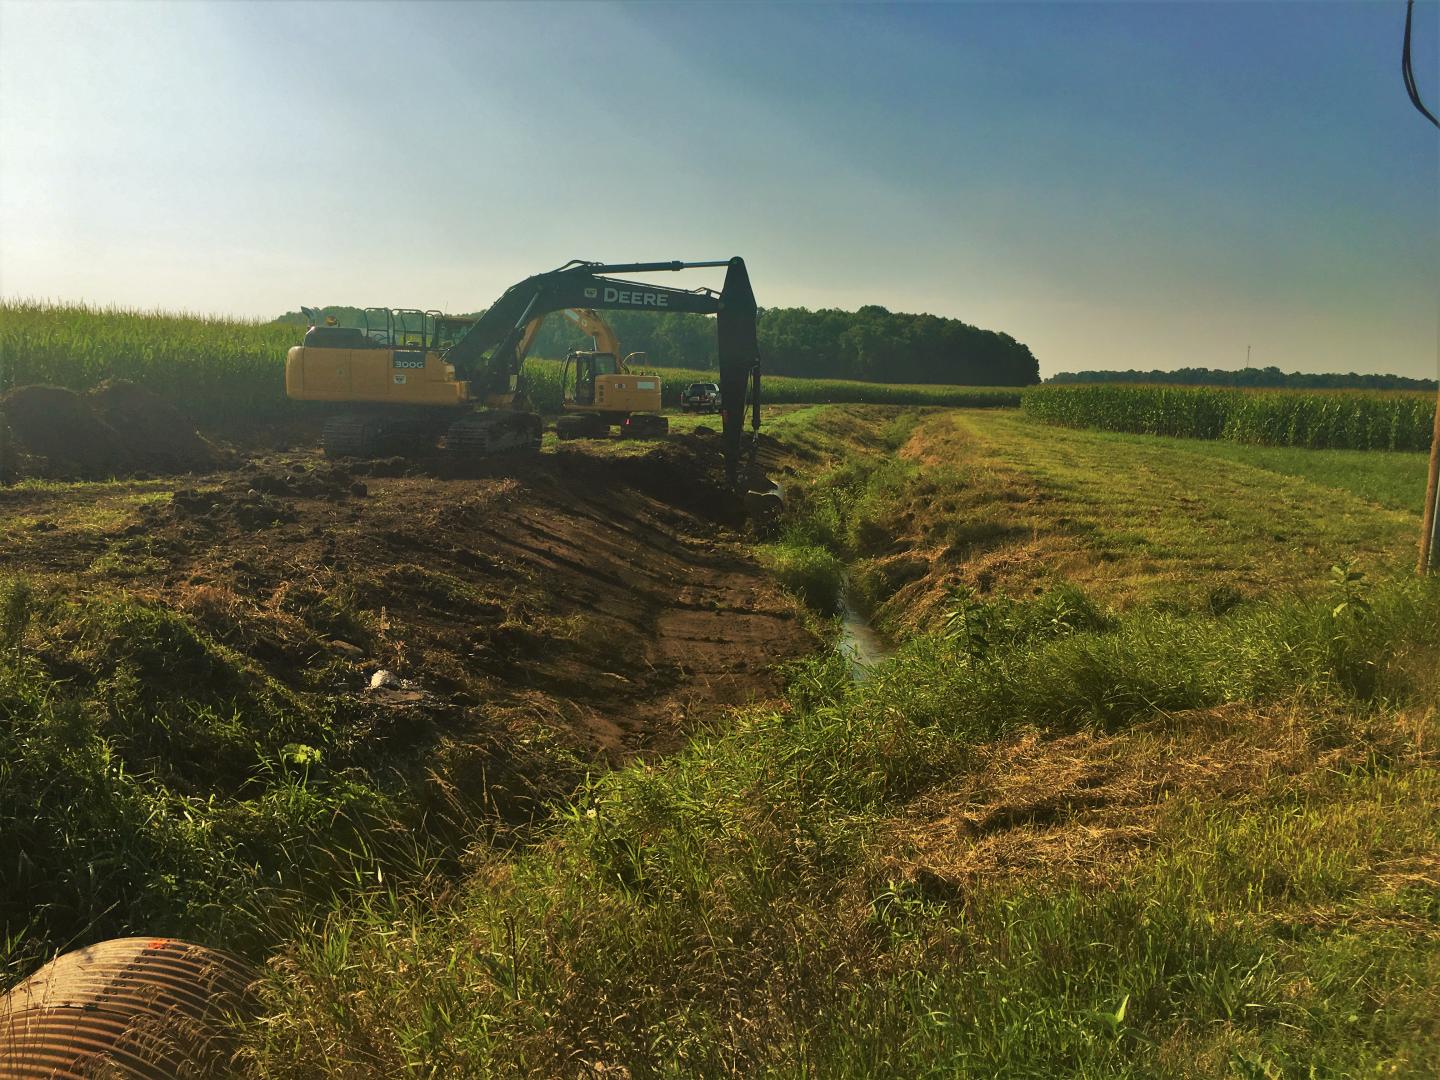 Construction begins on the two-stage ditch.  Excavators are used to dig out the ditch benches, increasing channel stability and reducing bank erosion.